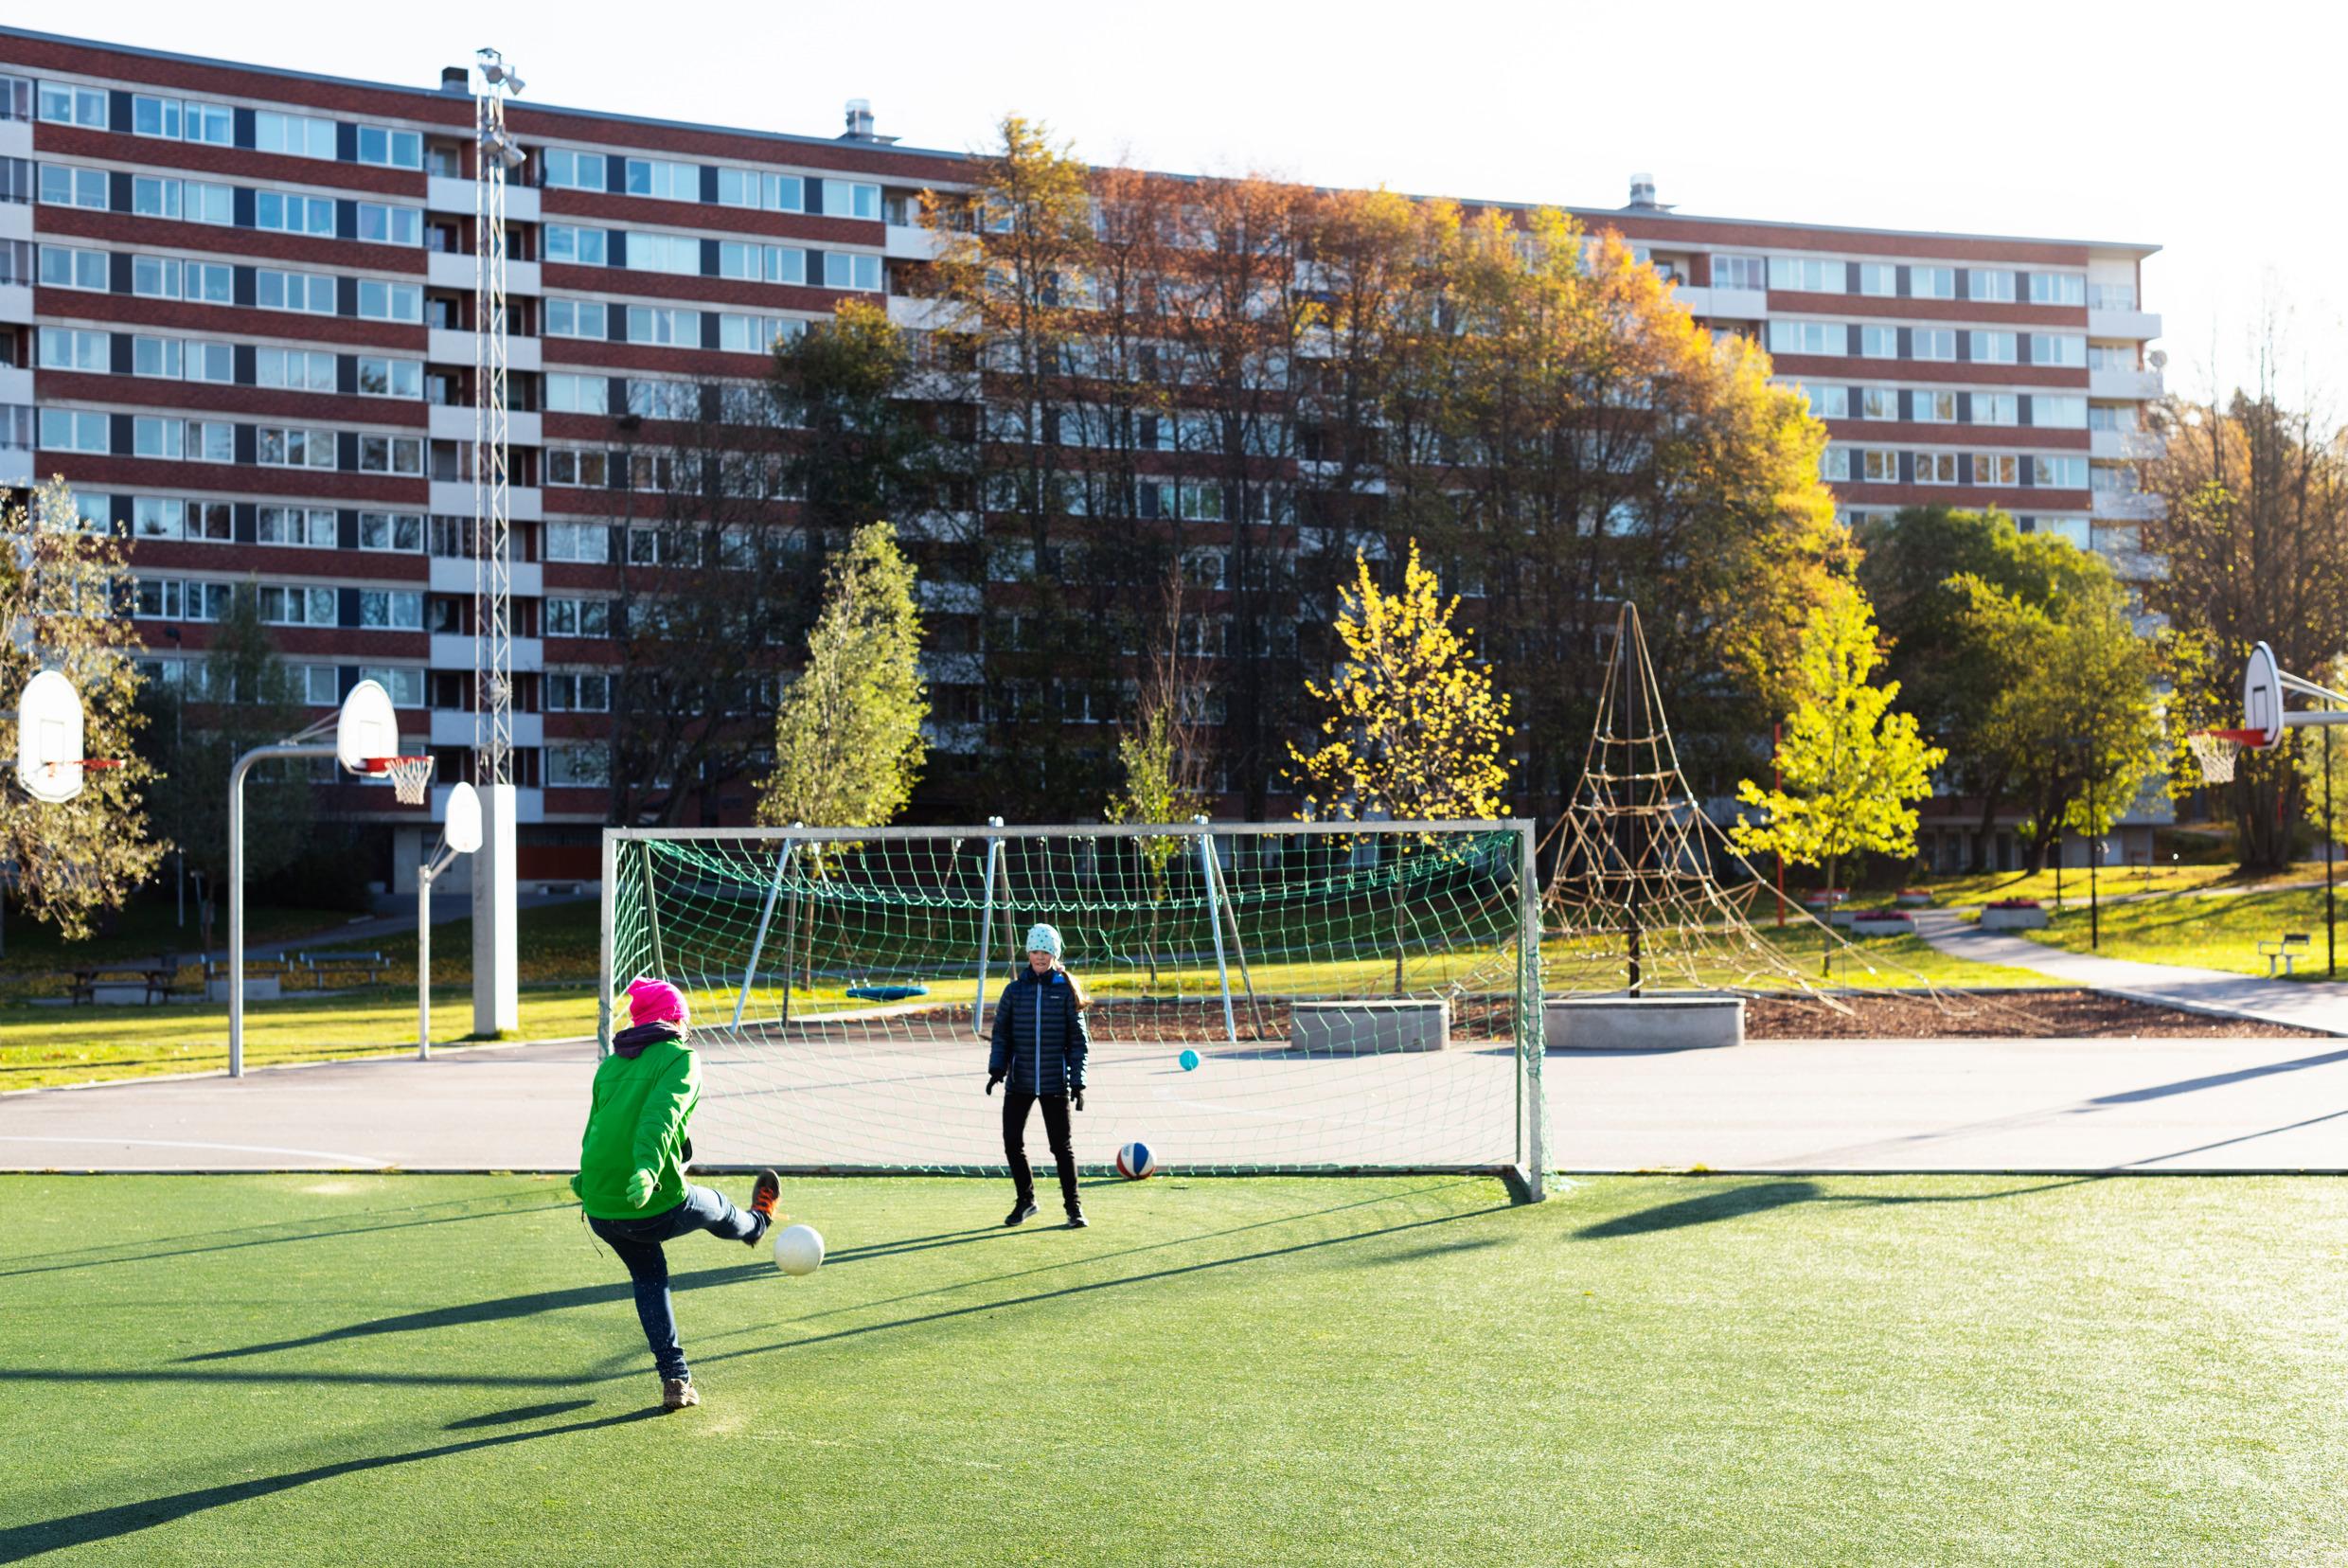 Two girls are playing football outside some apartment buildings in an area with a football pitch, basketball courts and a playground.